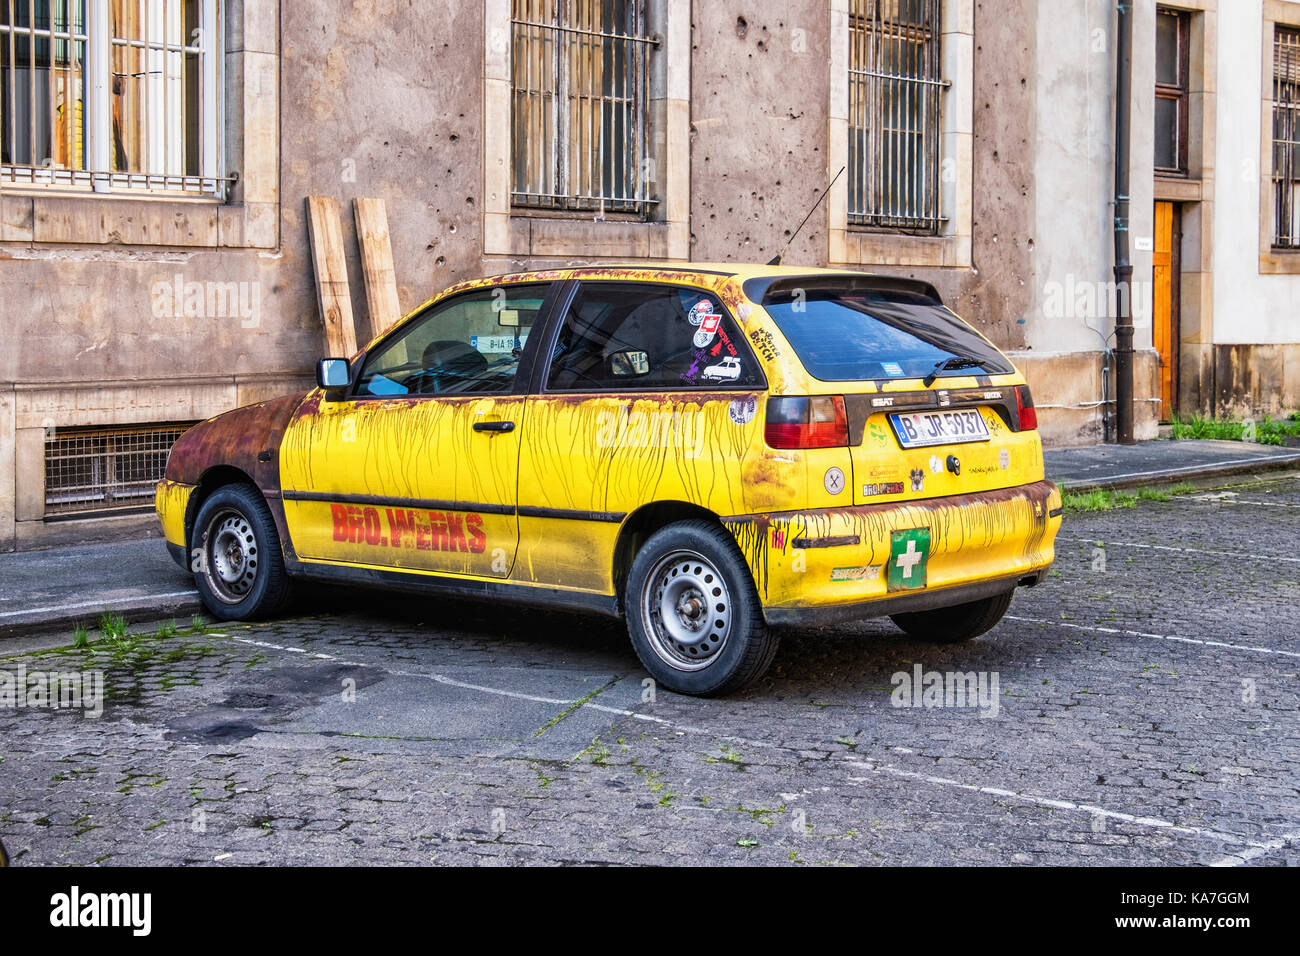 Berlin Mitte. Battered, rusty yellow SEAT IBiza car parked next to old war damaged Molkenmarkt building. Old Bro.werks vehicle Stock Photo